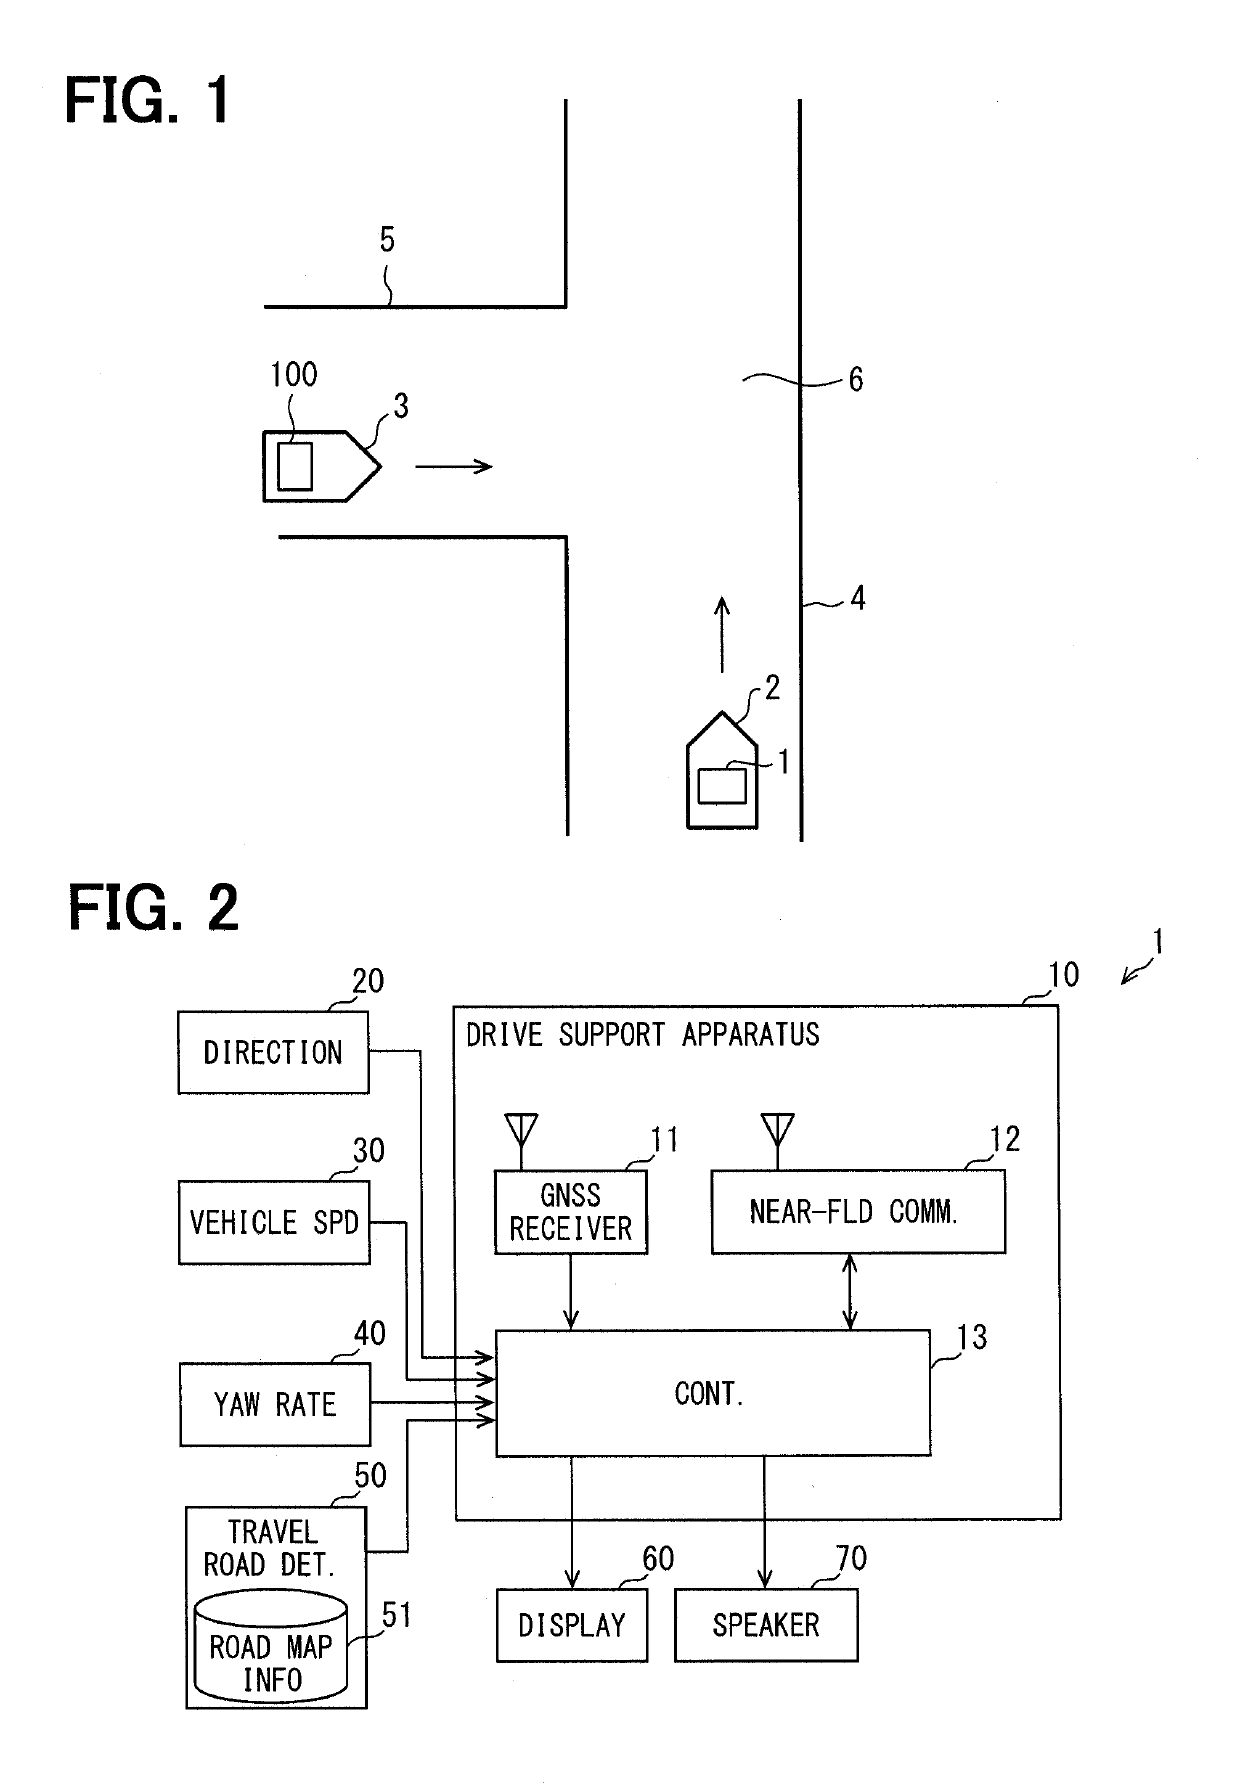 Drive support apparatus